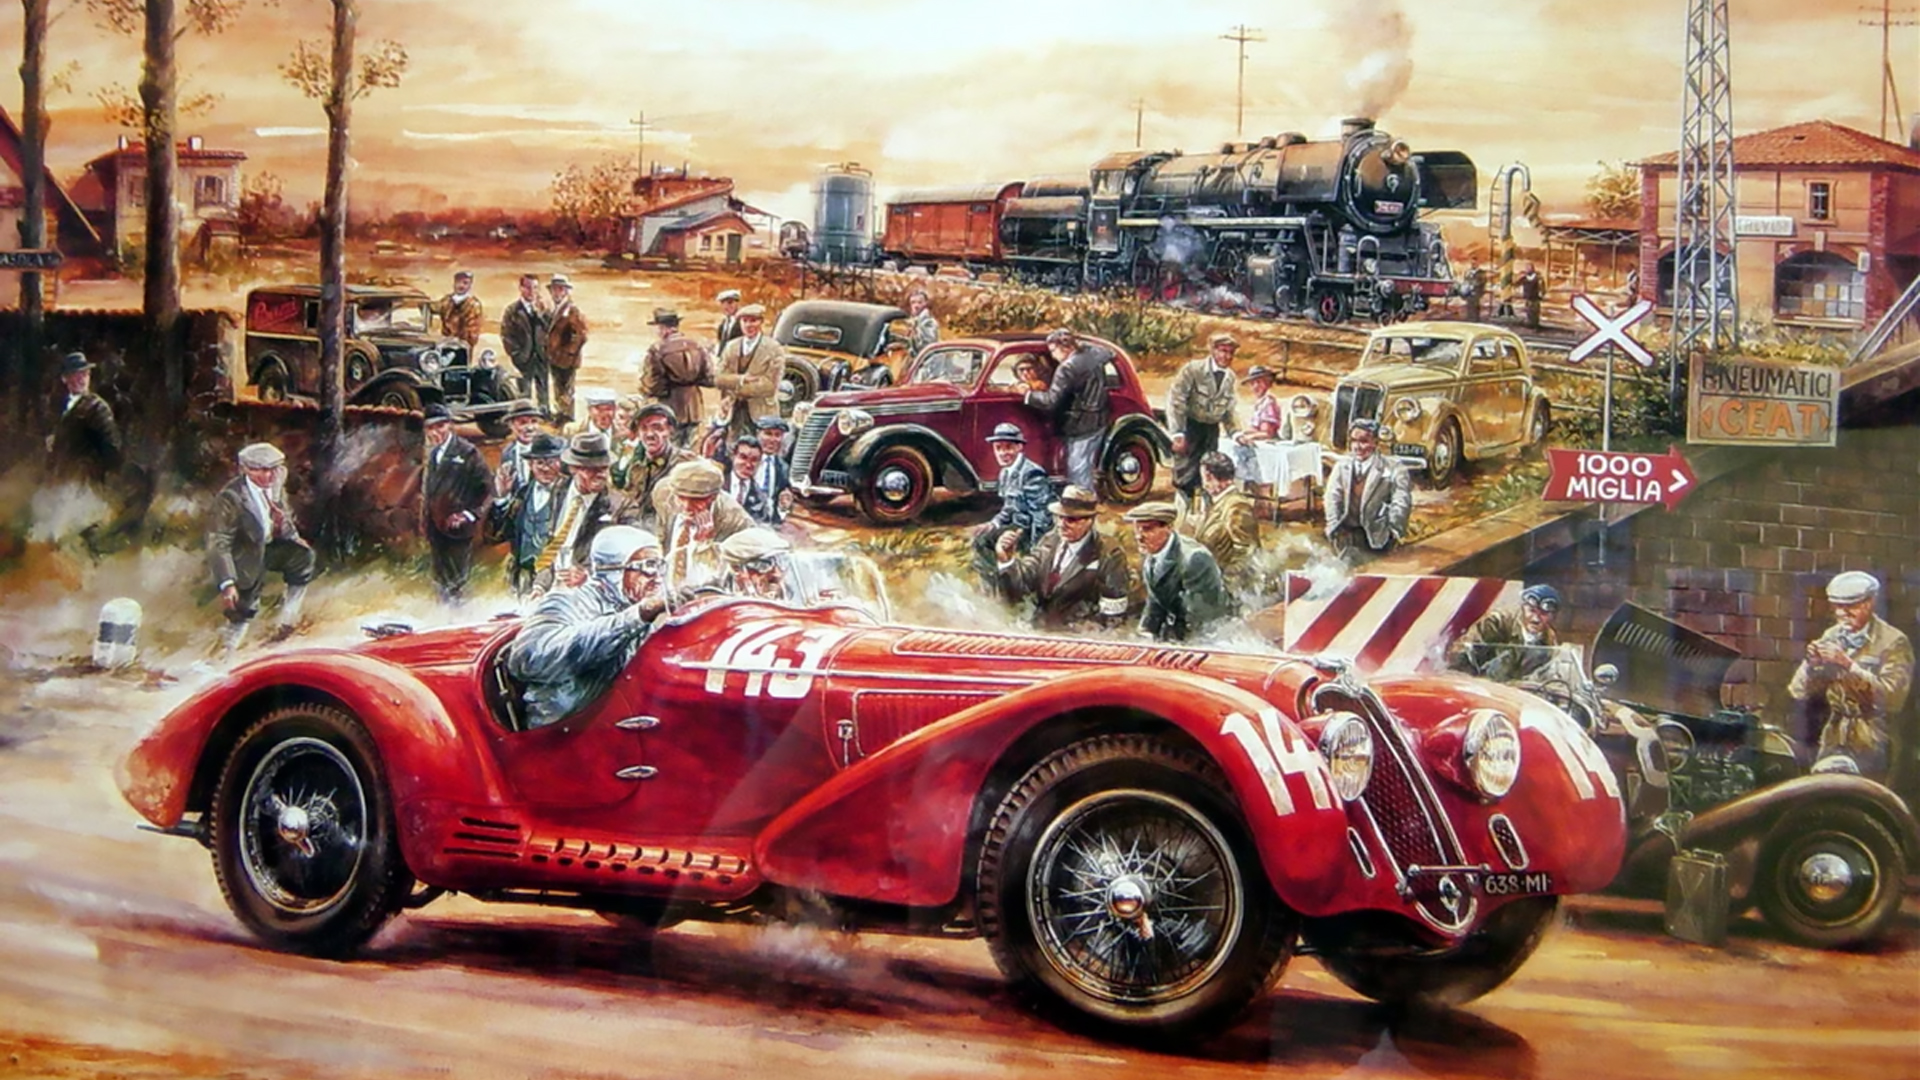 Mille Miglia 2: Great 1000 Miles Rally